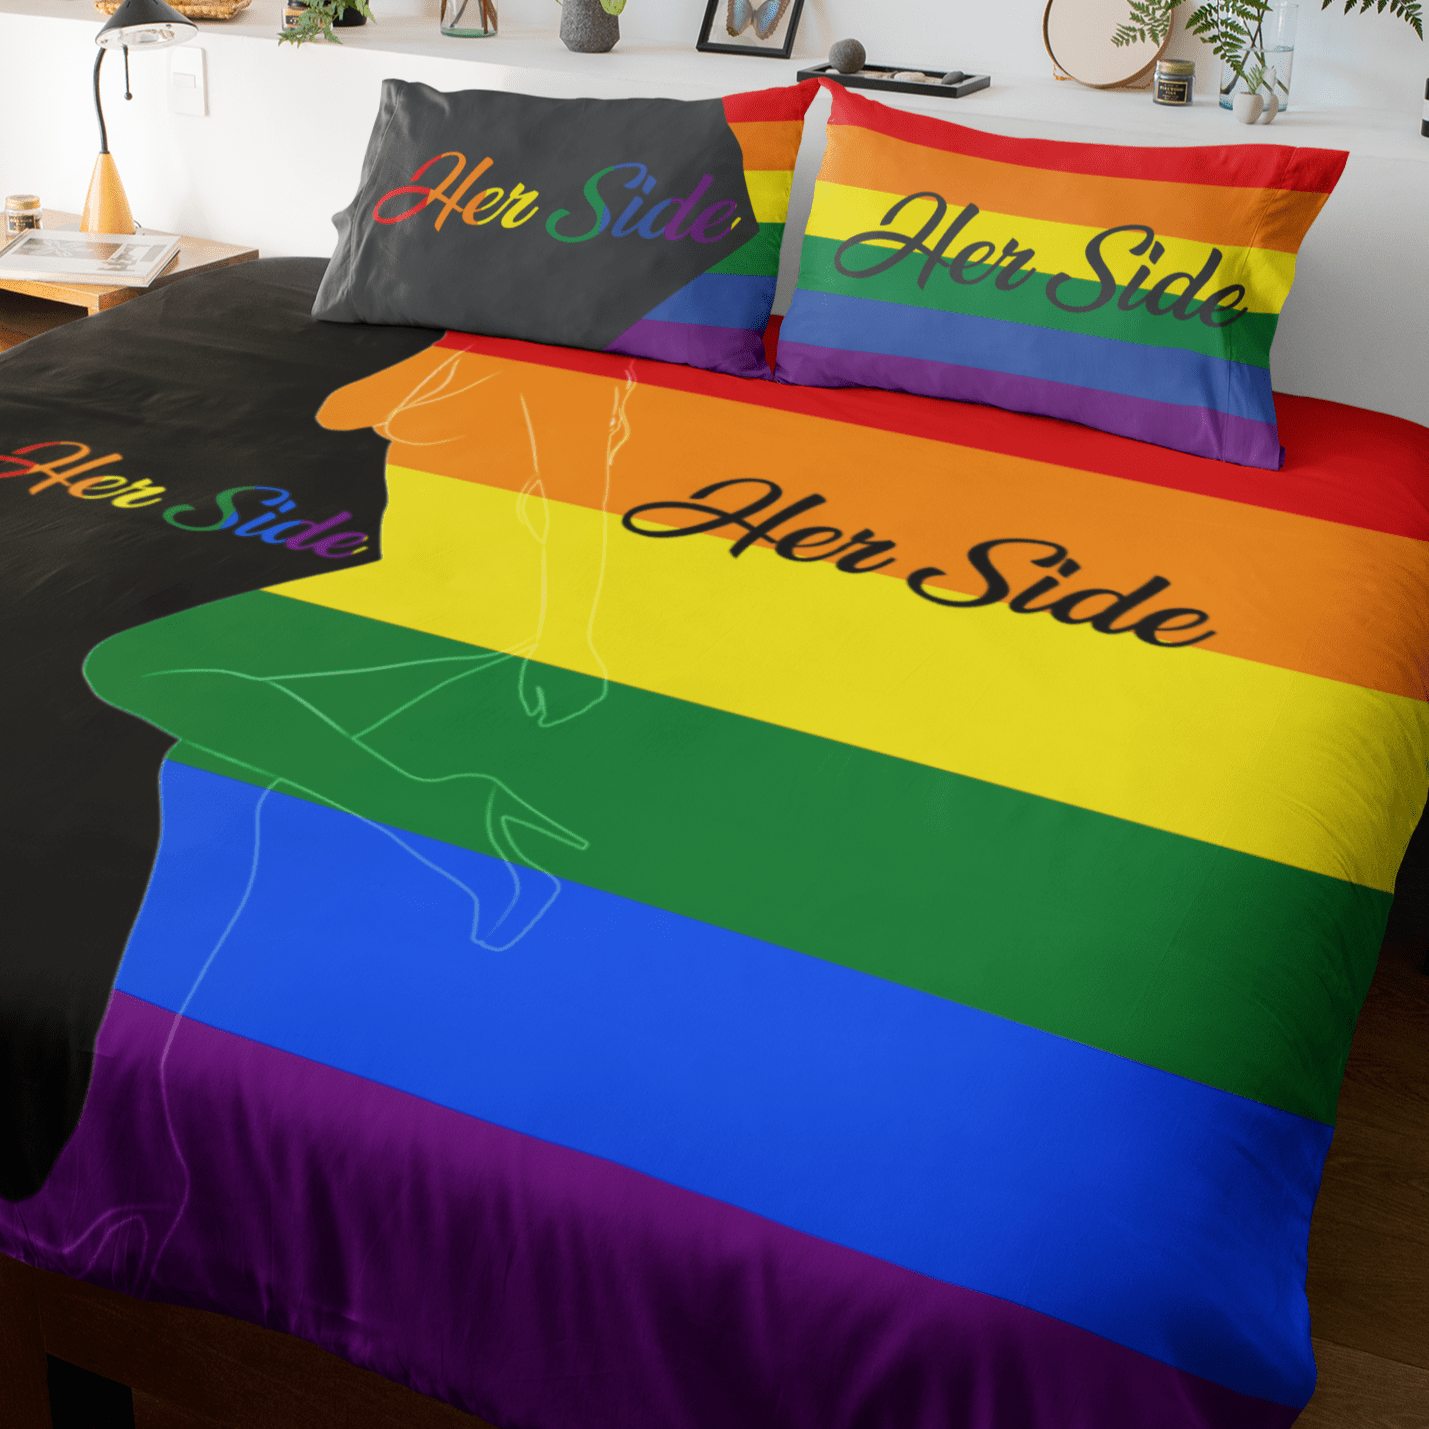 Pride Cot / Rainbow Right Her Side, Her Side Quilt Cover Set